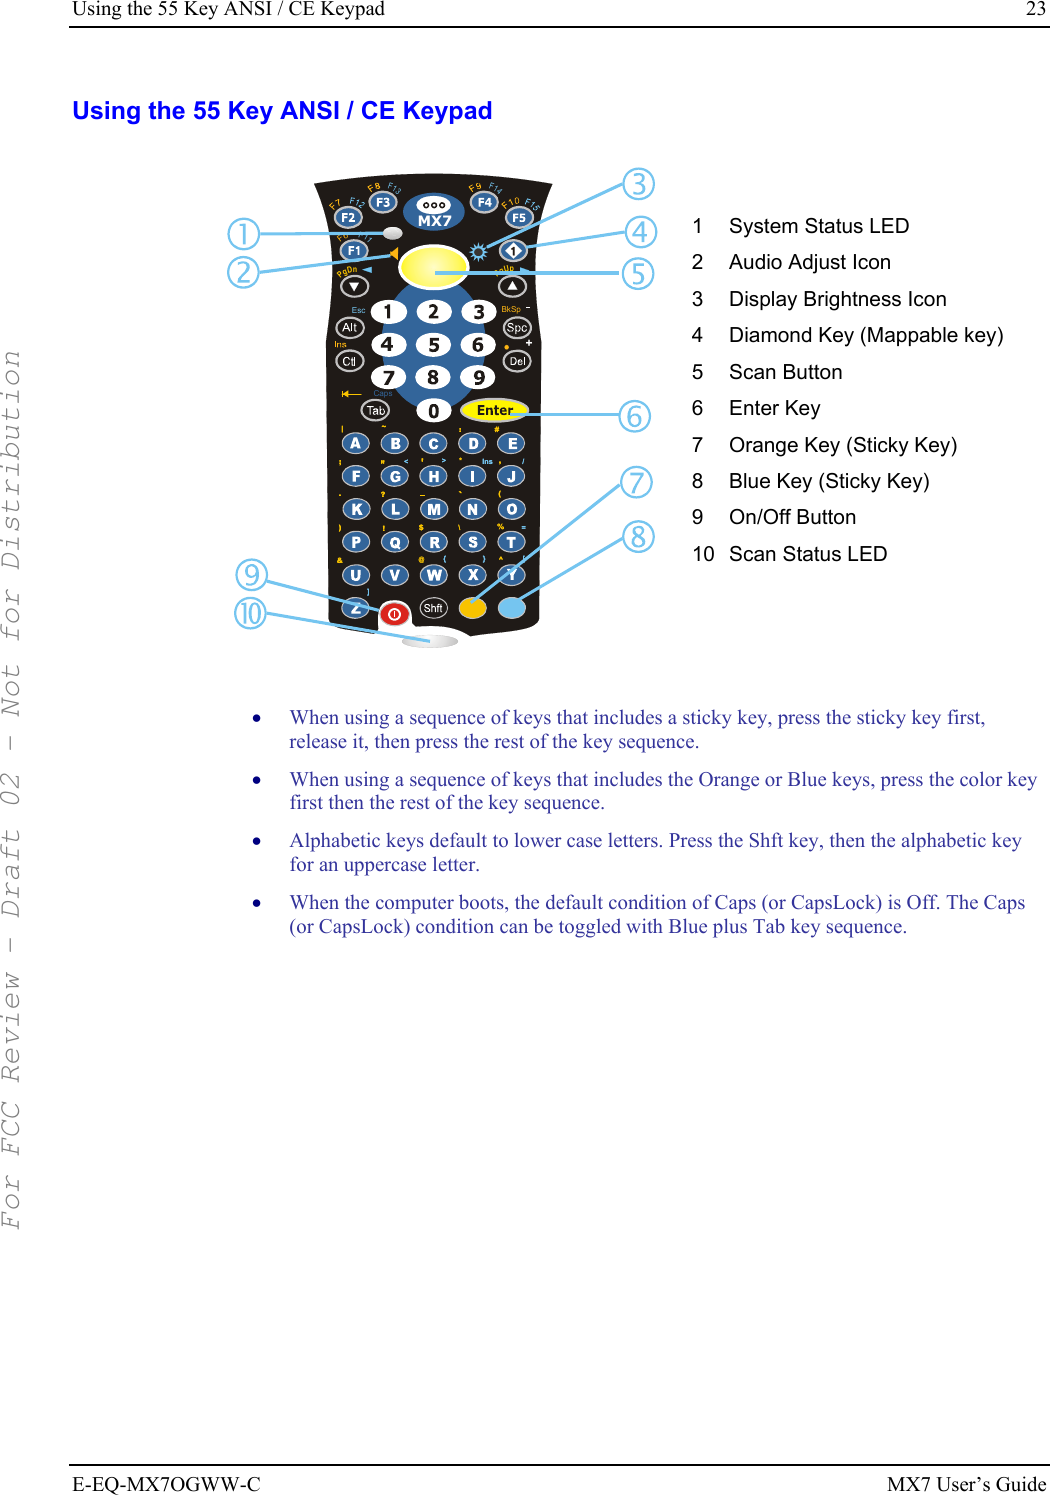 Using the 55 Key ANSI / CE Keypad  23 E-EQ-MX7OGWW-C MX7 User’s Guide Using the 55 Key ANSI / CE Keypad BkSp+F11MX7PgDnPgUpF6F13F14CapsEsc|~:#;*,&gt;/Ins&lt;.(?=)\!$%^&amp;@}{[]|~:#;*,&gt;/Ins&lt;.(?=)\!$%^&amp;@}{[] 1  System Status LED 2  Audio Adjust Icon 3  Display Brightness Icon 4  Diamond Key (Mappable key) 5 Scan Button 6 Enter Key 7  Orange Key (Sticky Key) 8  Blue Key (Sticky Key) 9 On/Off Button 10 Scan Status LED   • When using a sequence of keys that includes a sticky key, press the sticky key first, release it, then press the rest of the key sequence.  • When using a sequence of keys that includes the Orange or Blue keys, press the color key first then the rest of the key sequence.  • Alphabetic keys default to lower case letters. Press the Shft key, then the alphabetic key for an uppercase letter. • When the computer boots, the default condition of Caps (or CapsLock) is Off. The Caps (or CapsLock) condition can be toggled with Blue plus Tab key sequence.    For FCC Review - Draft 02 - Not for Distribution